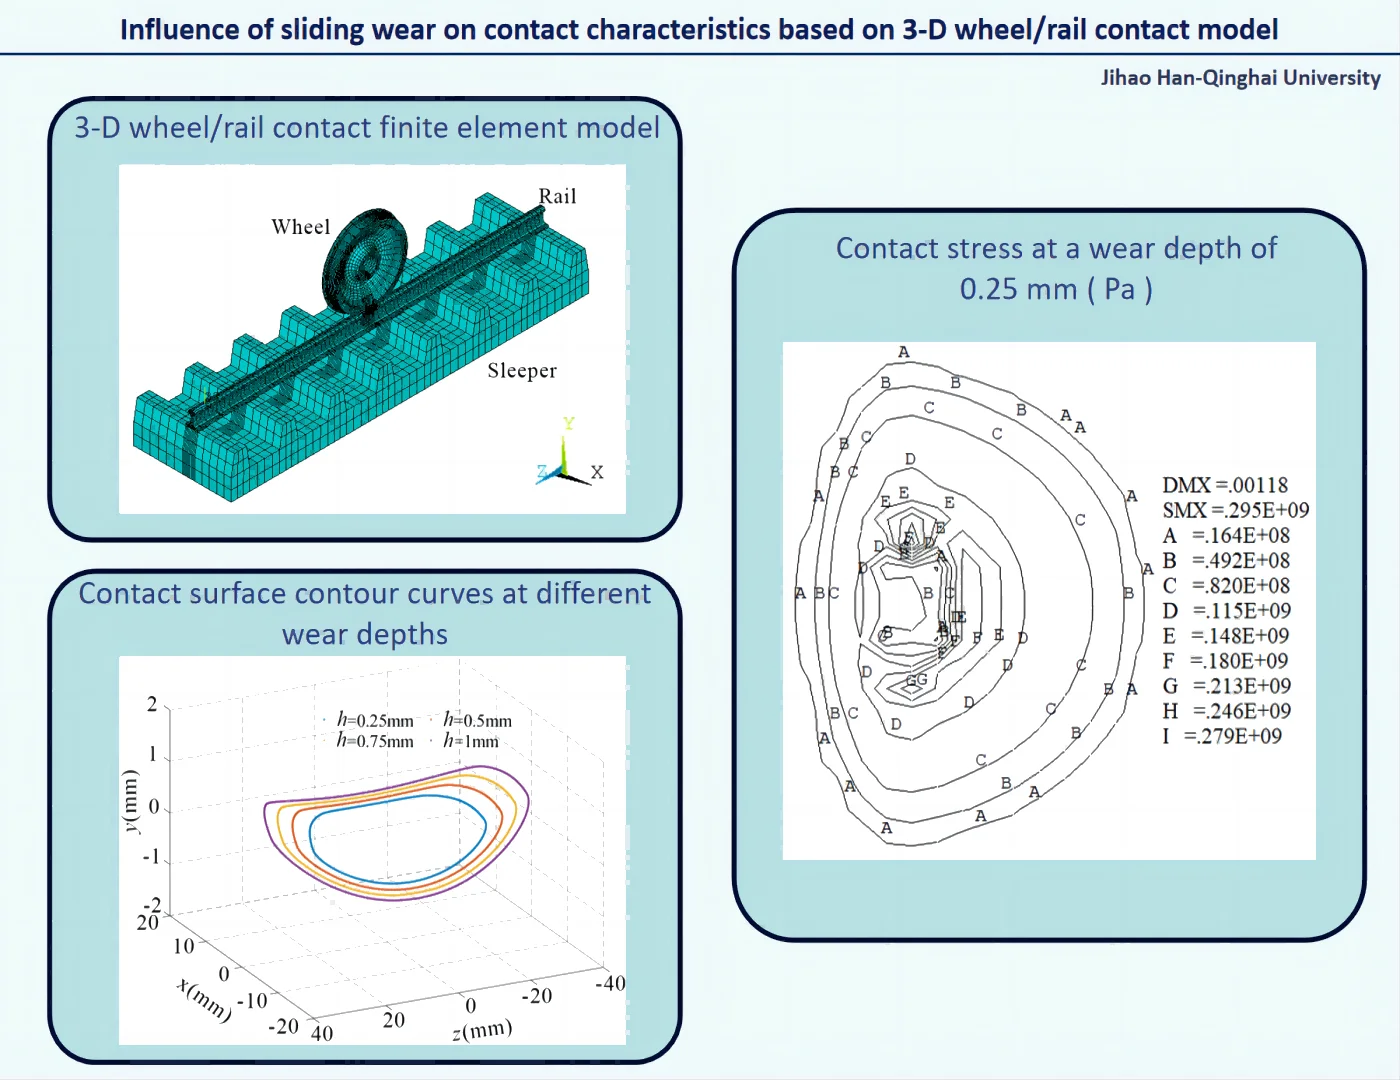 Influence of sliding wear on contact characteristics based on 3-D wheel/rail contact model